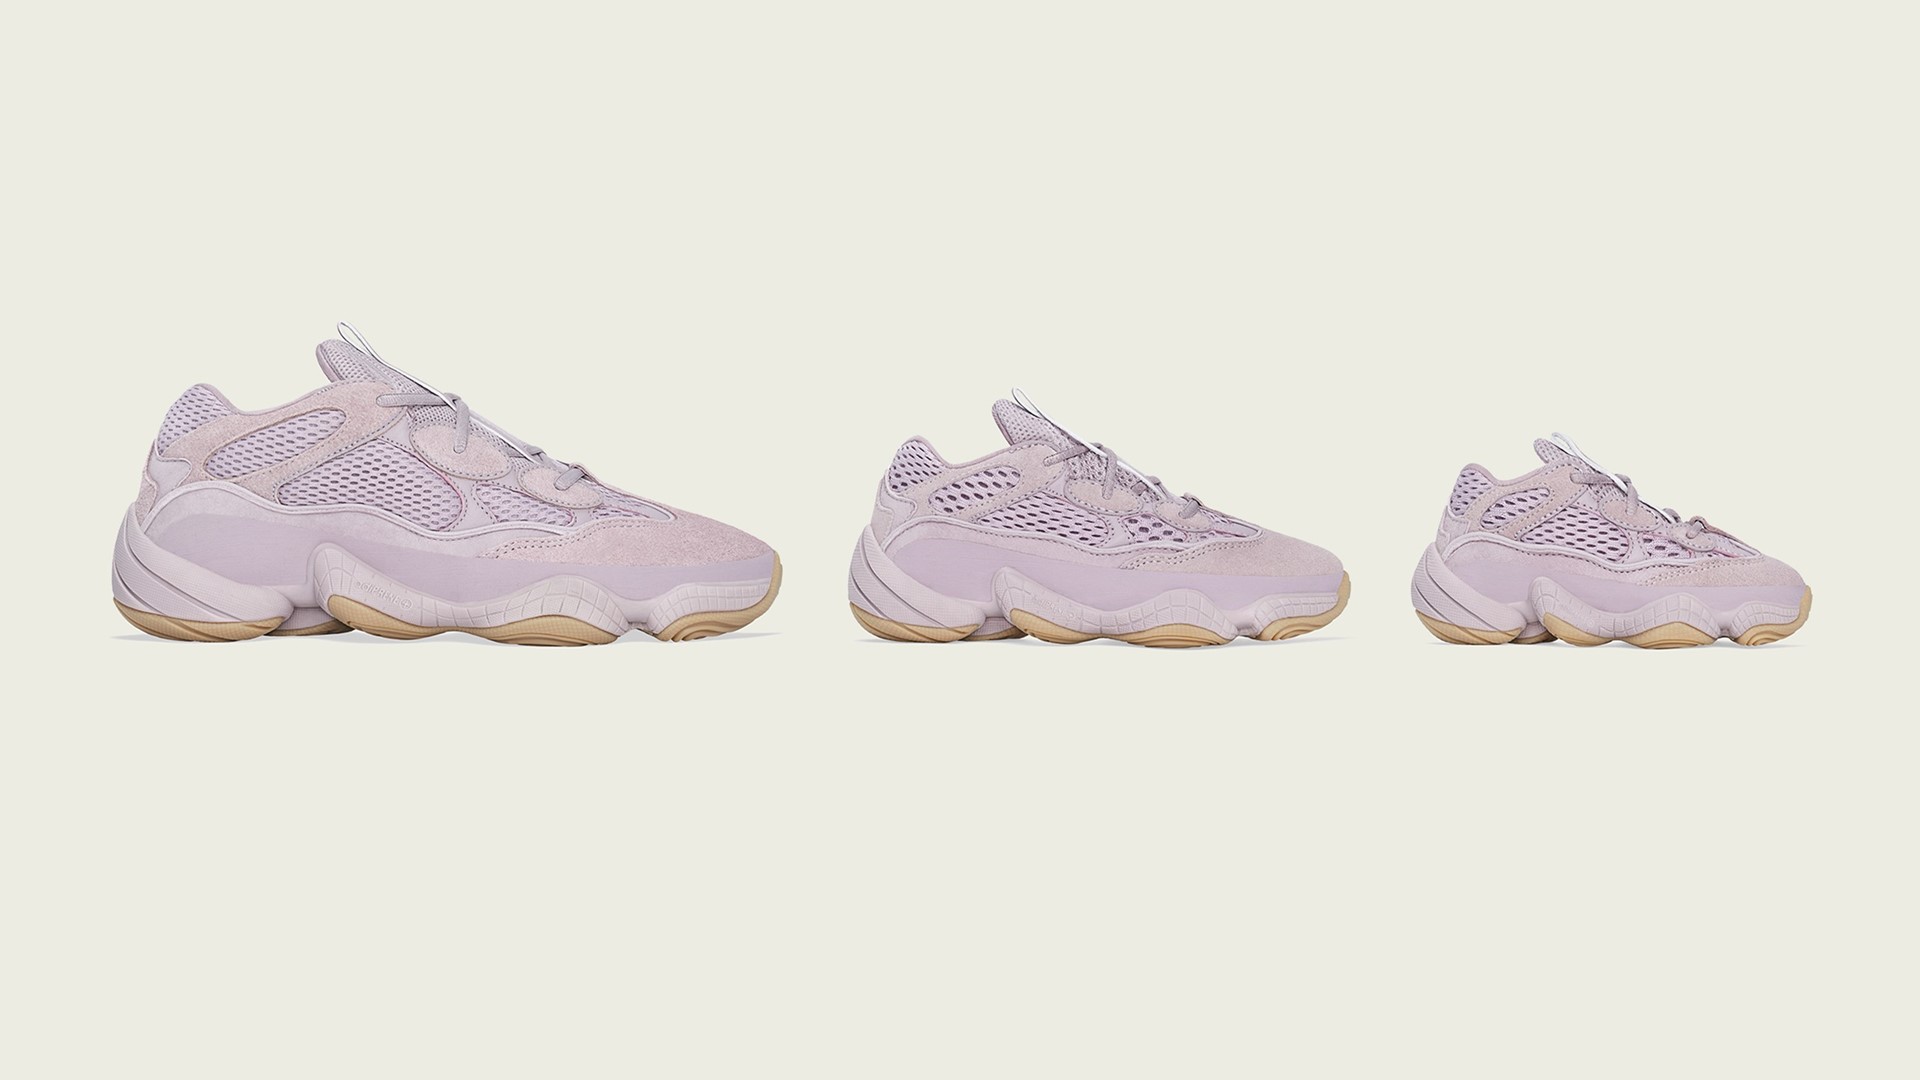 Foresee motif Logically adidas + KANYE WEST announce the YEEZY 500 Soft Vision